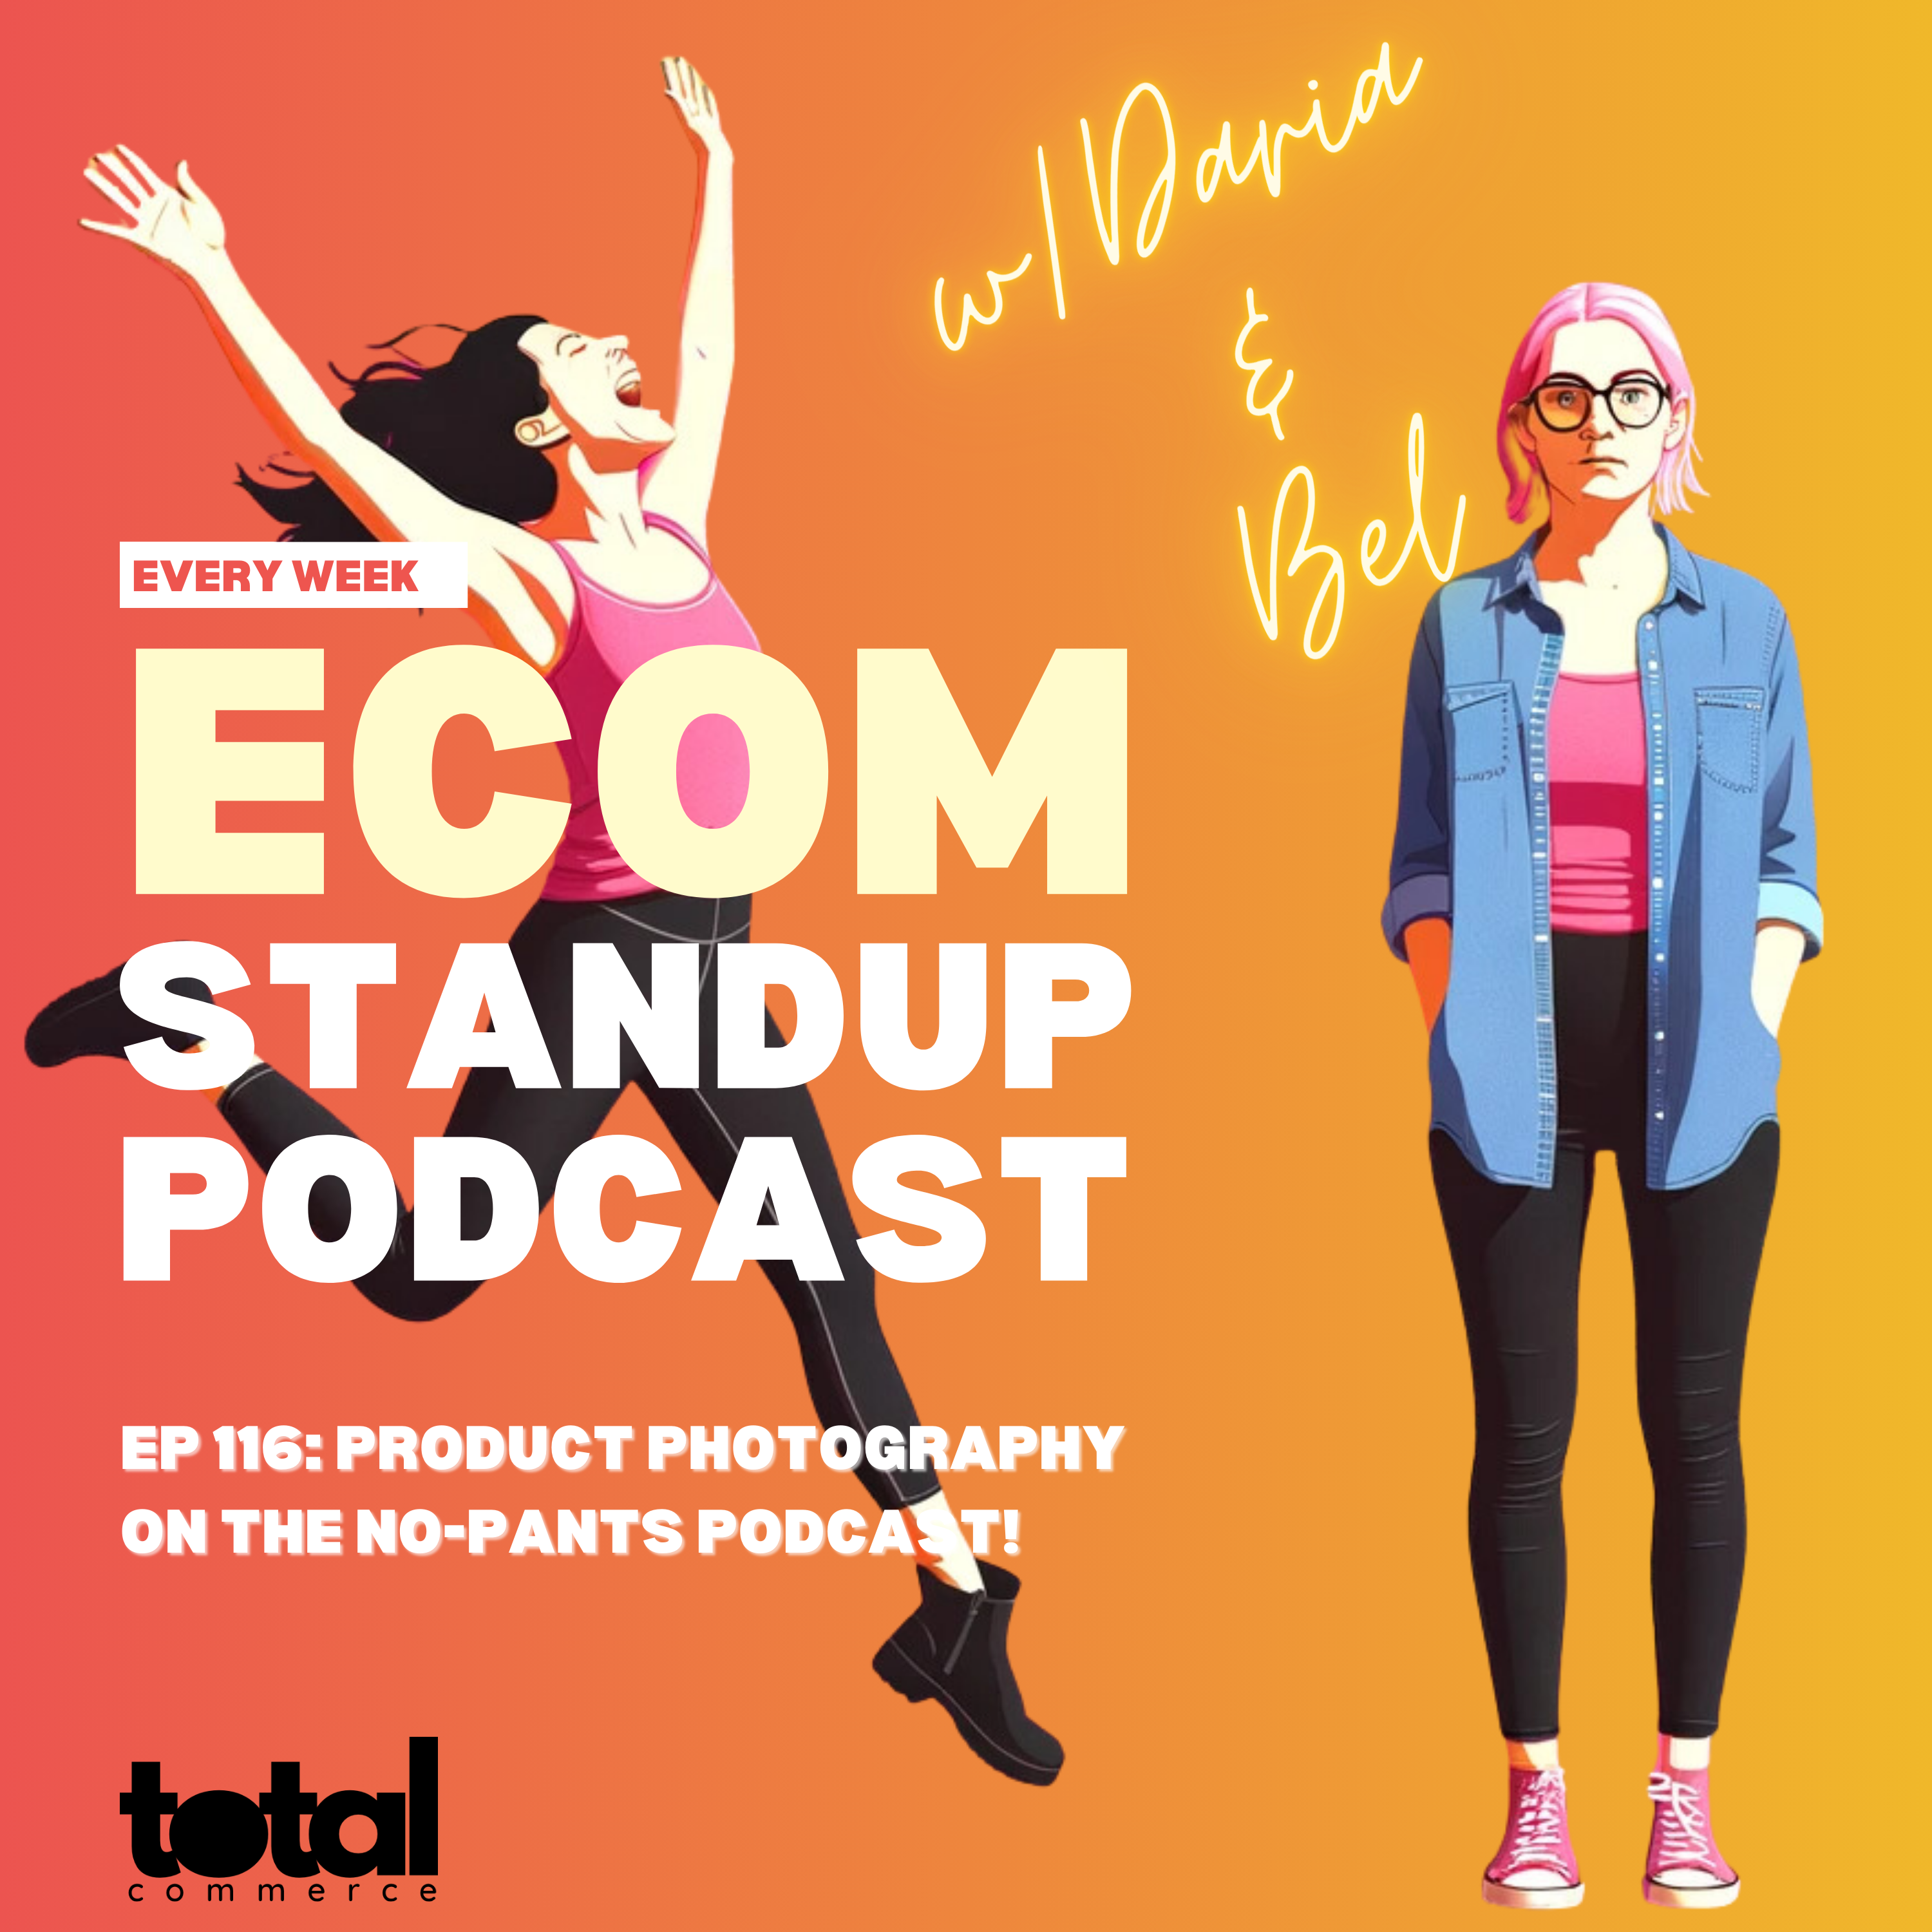 EP 116: Product Photography on the No-Pants Podcast!